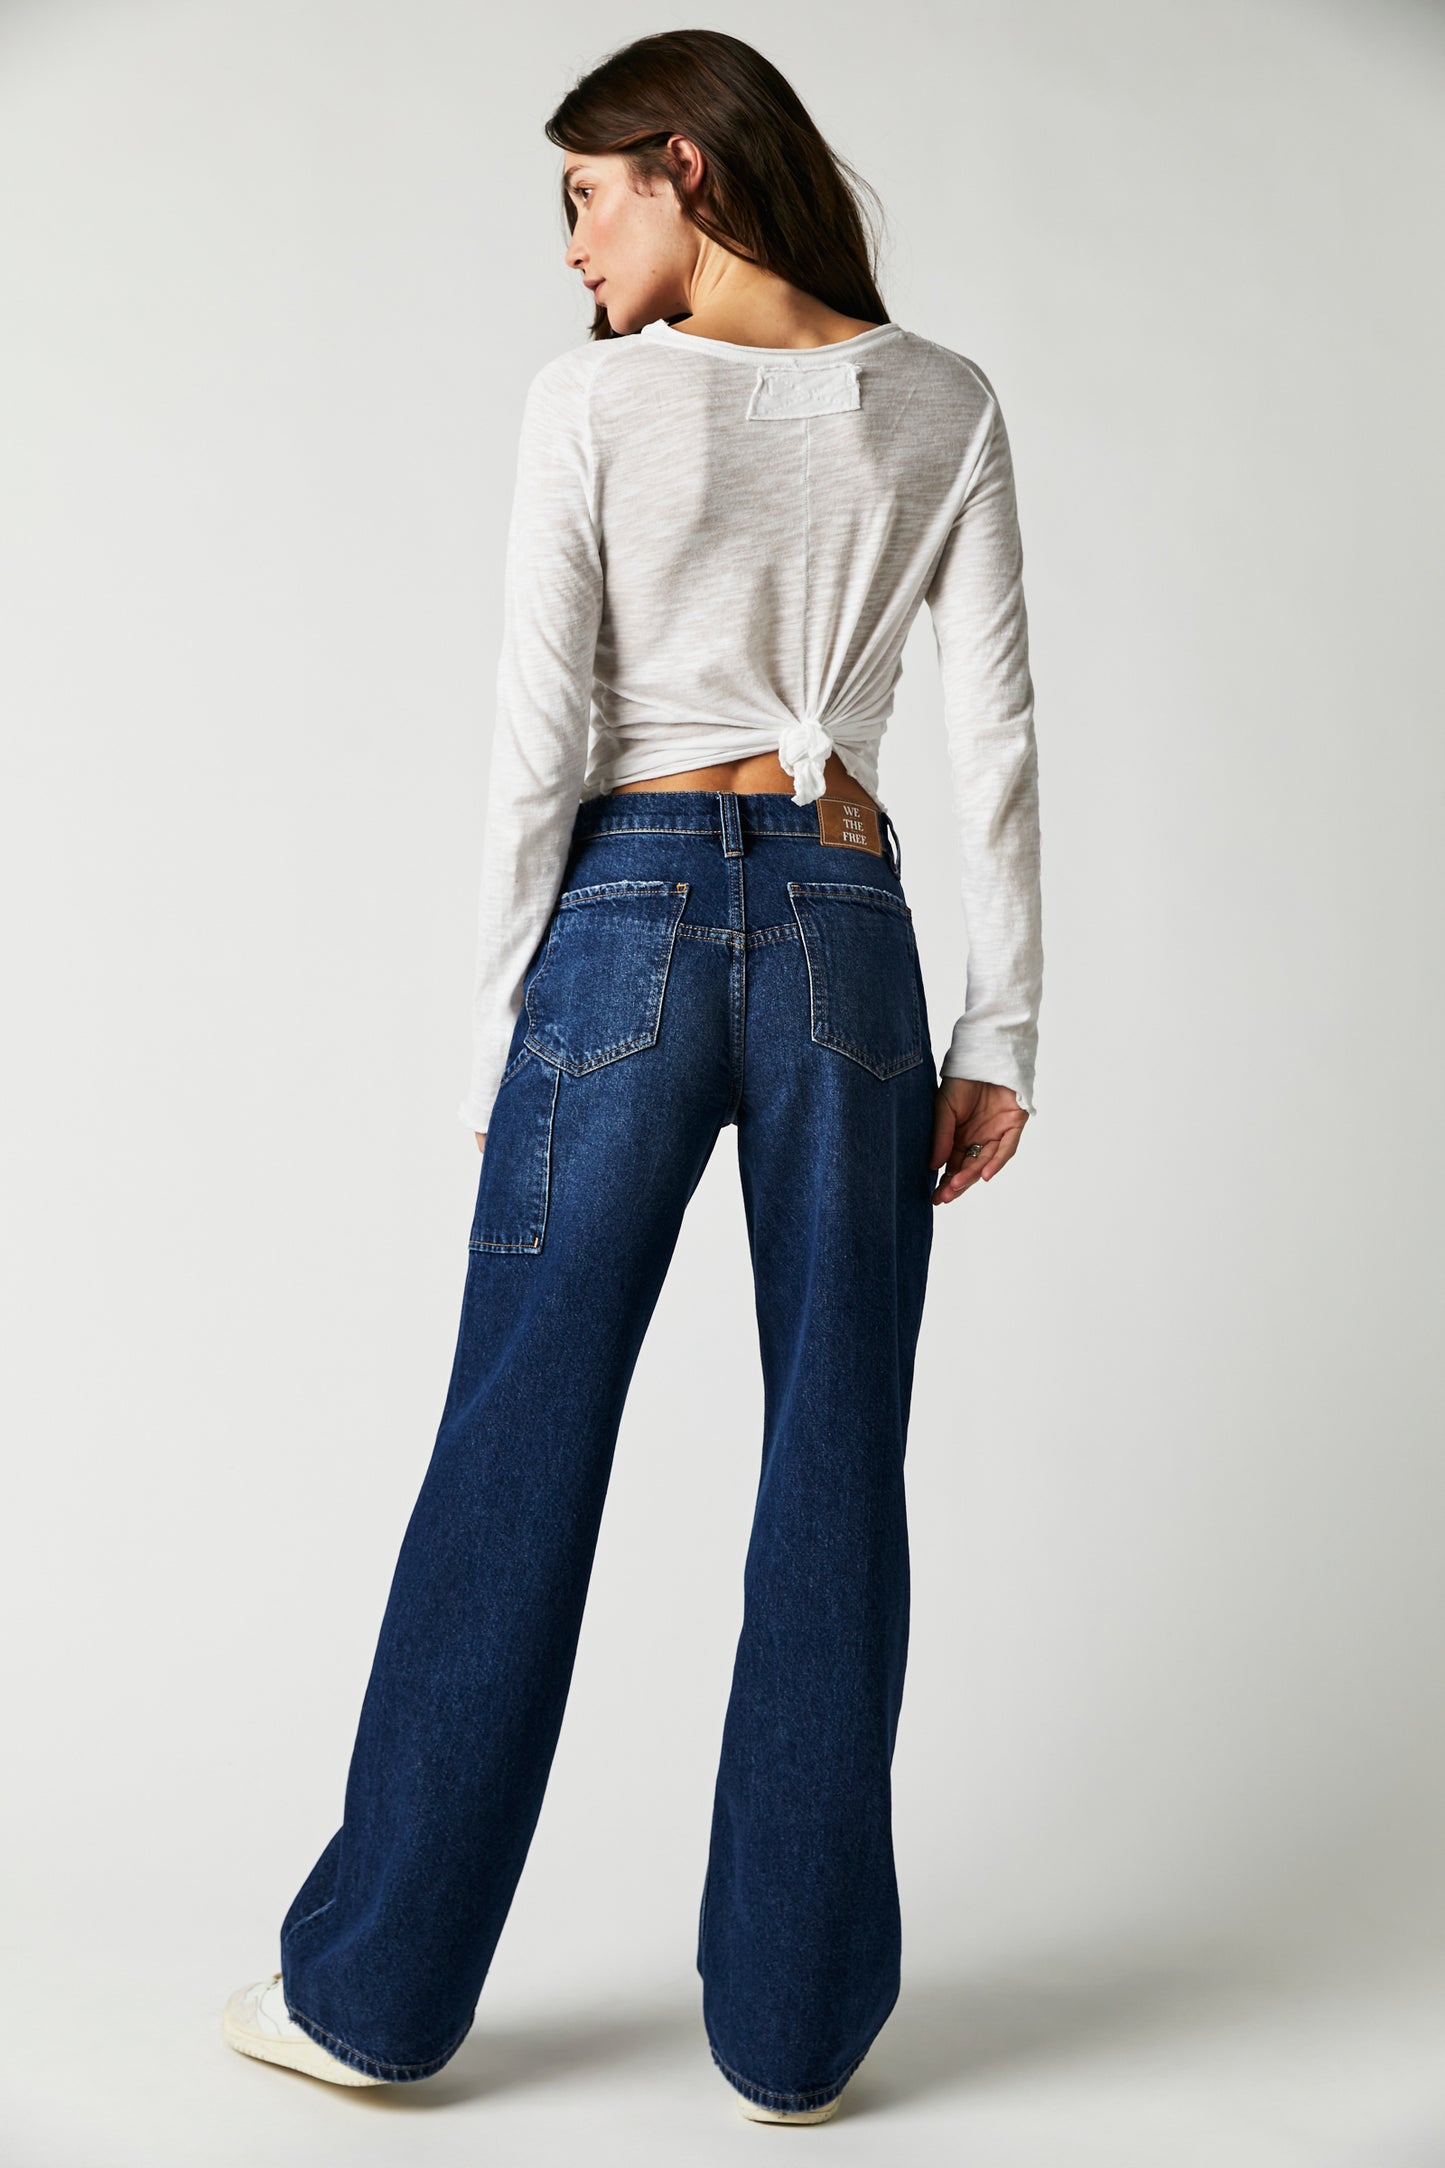 FREE PEOPLE TINSLEY BAGGY HIGH RISE JEANS DARK ROMANCE